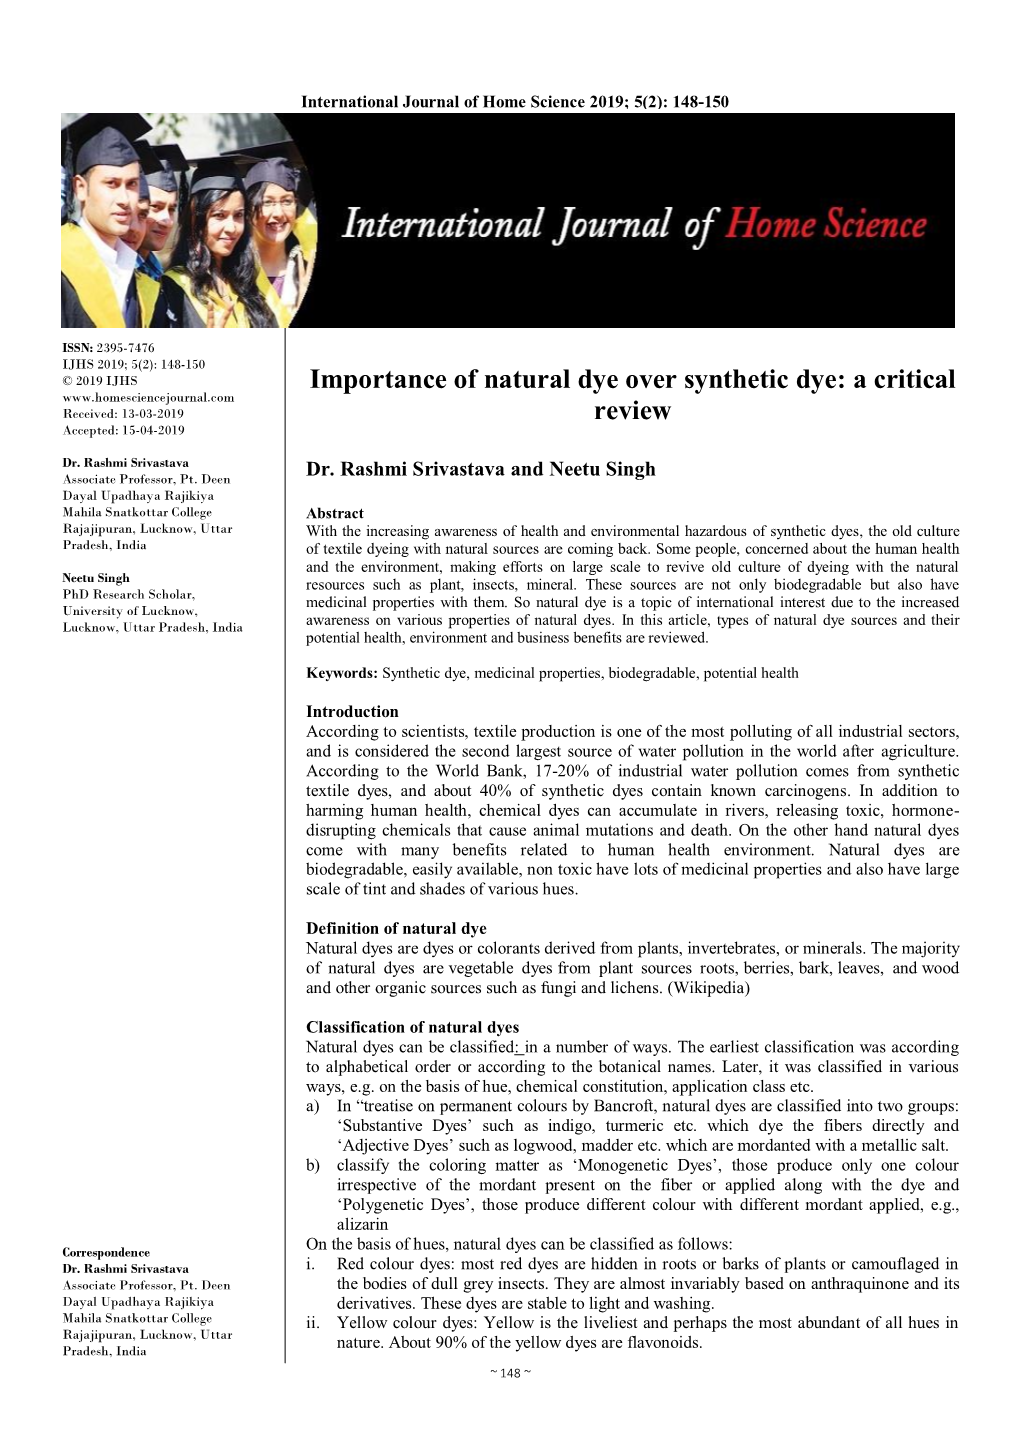 Importance of Natural Dye Over Synthetic Dye: a Critical Received: 13-03-2019 Review Accepted: 15-04-2019